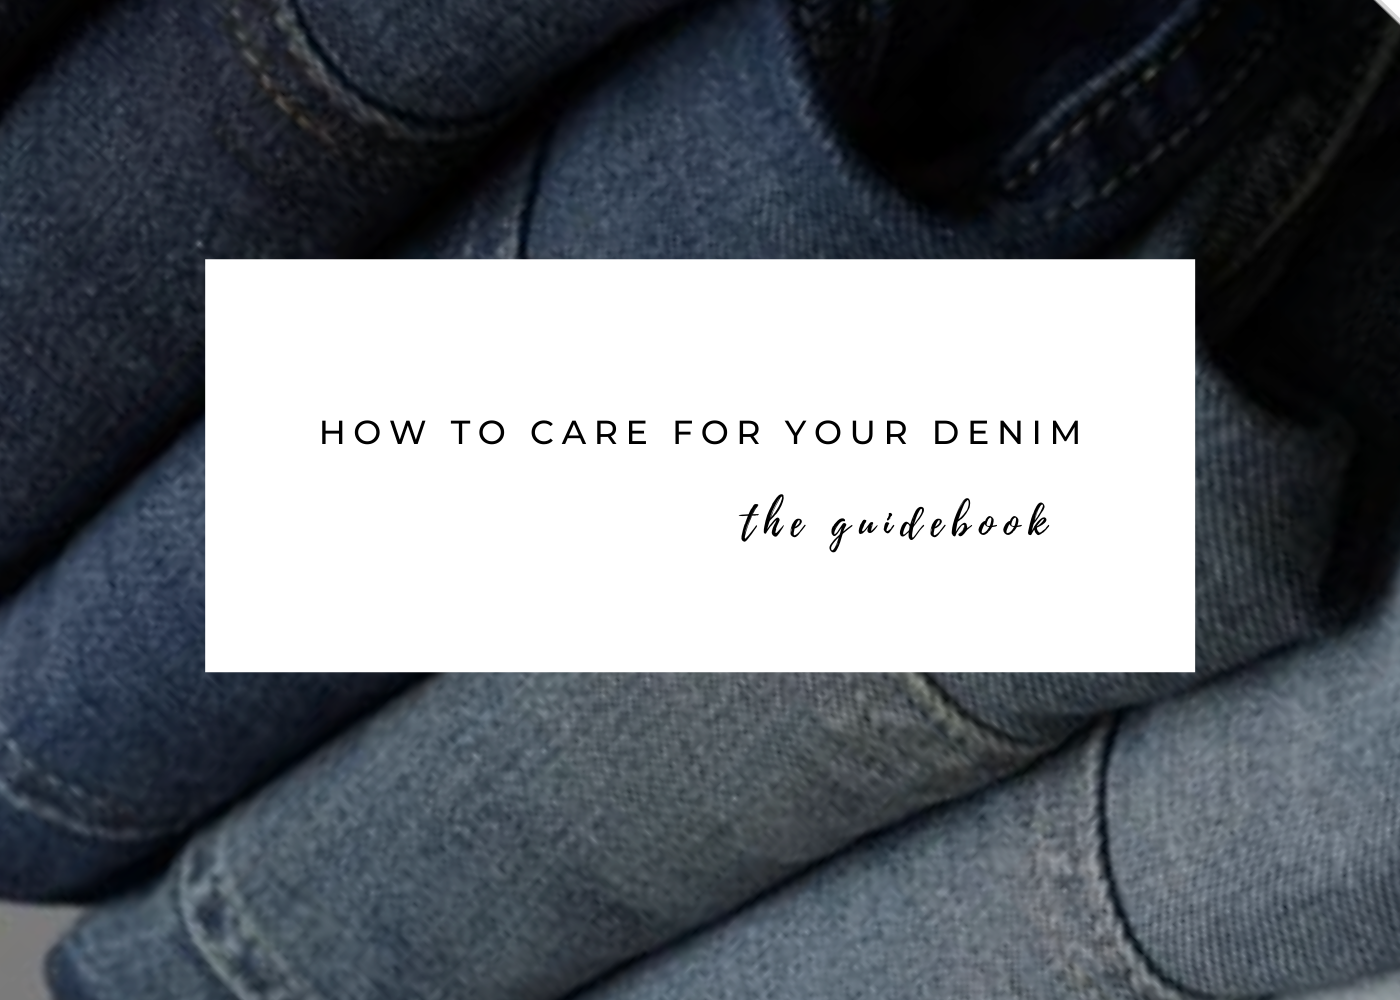 How to Care for Denim - The Quintessential Guide